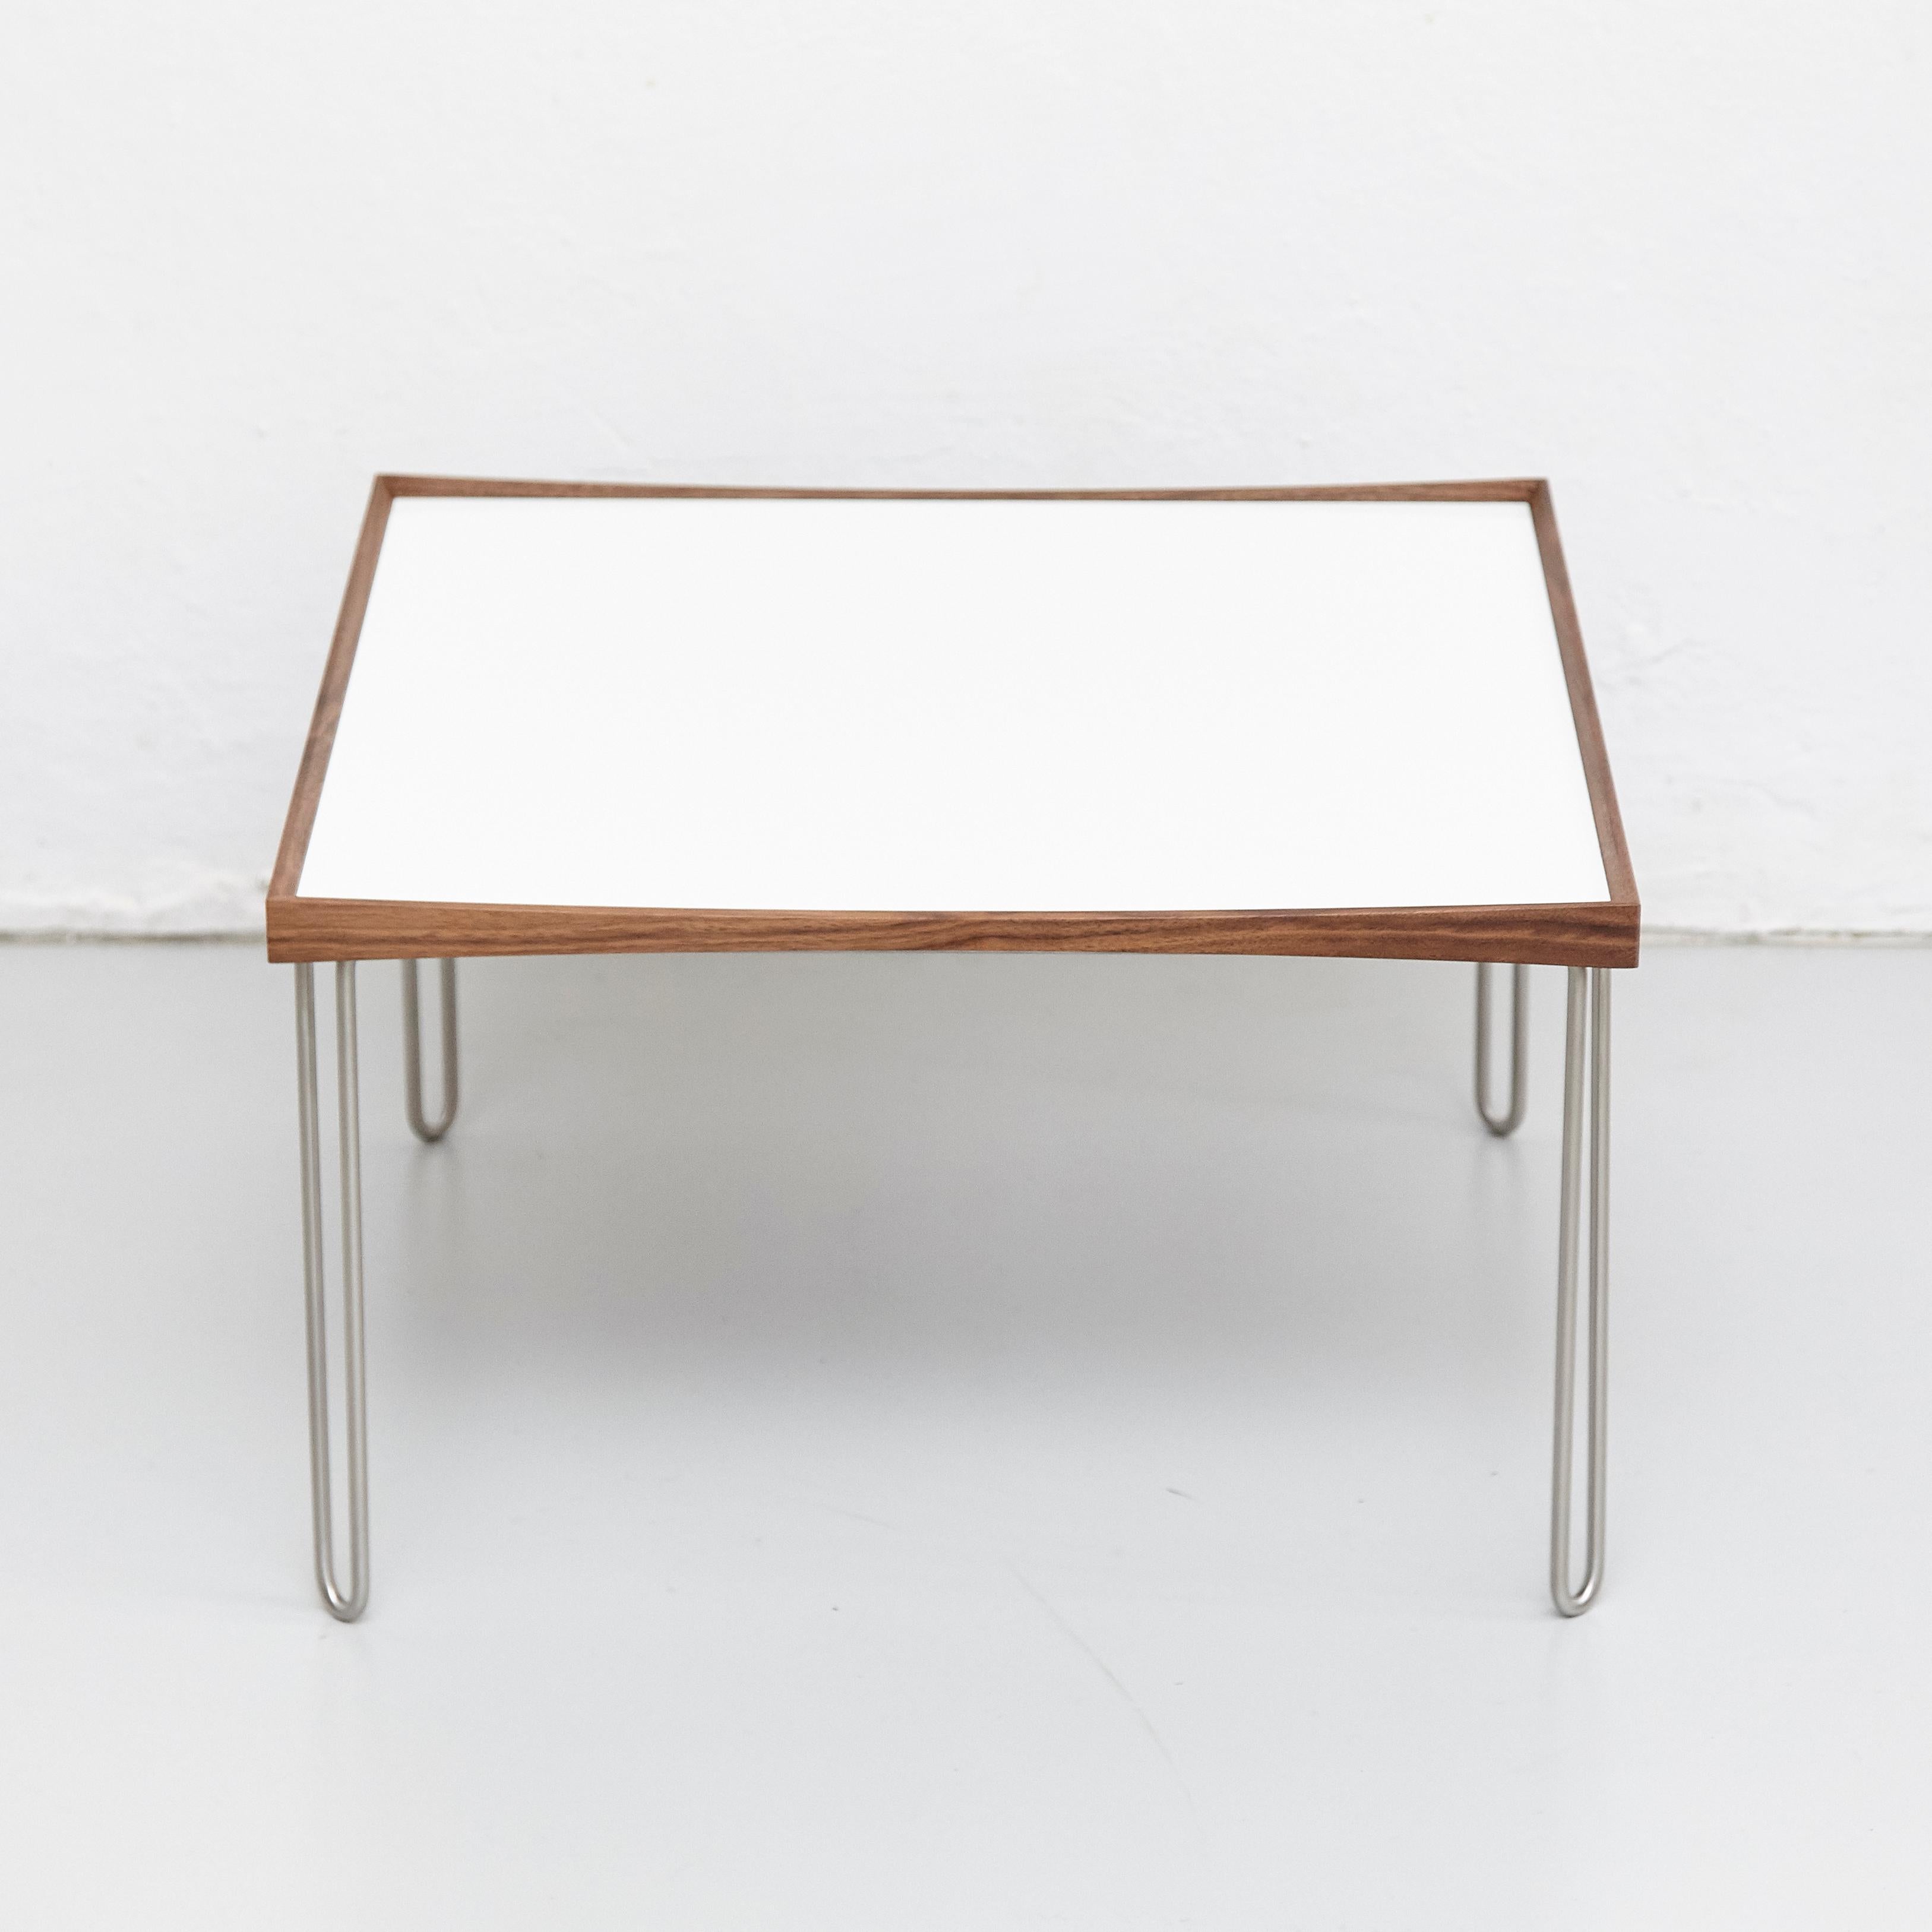 Table designed by Finn Juhl in 1965, relaunched in 2002.
Manufactured by House of Finn Juhl in Denmark.

The Tray table, designed by Finn Juhl in 1965, is a further development of his famous Turning Trays, which today are manufactured by